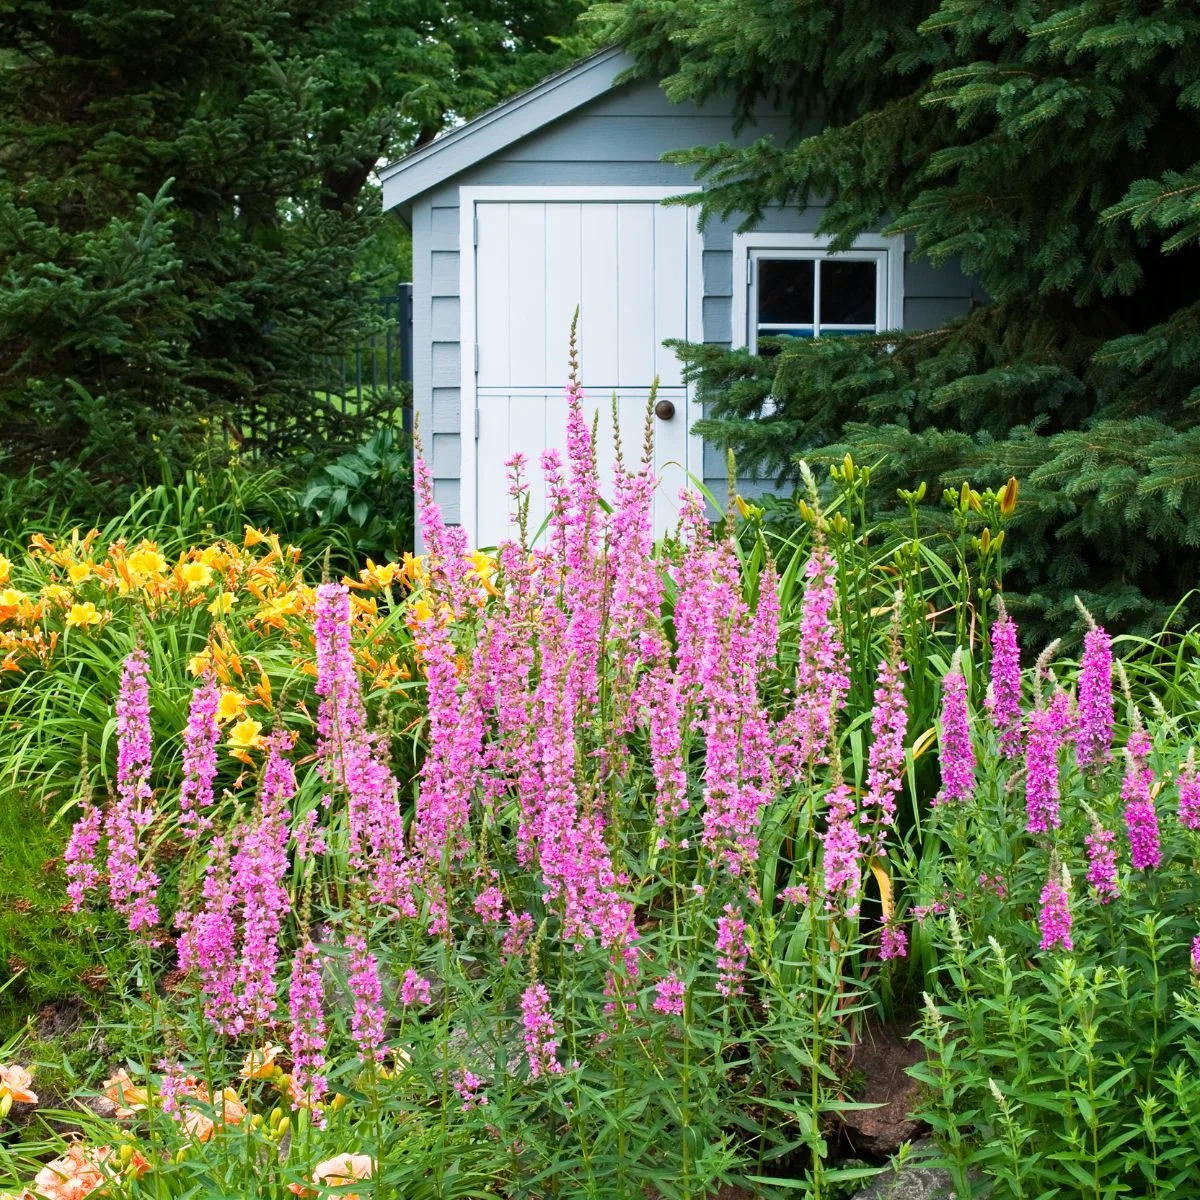 A gray shed in the background wiht pink and yellow flowers in front of it. 